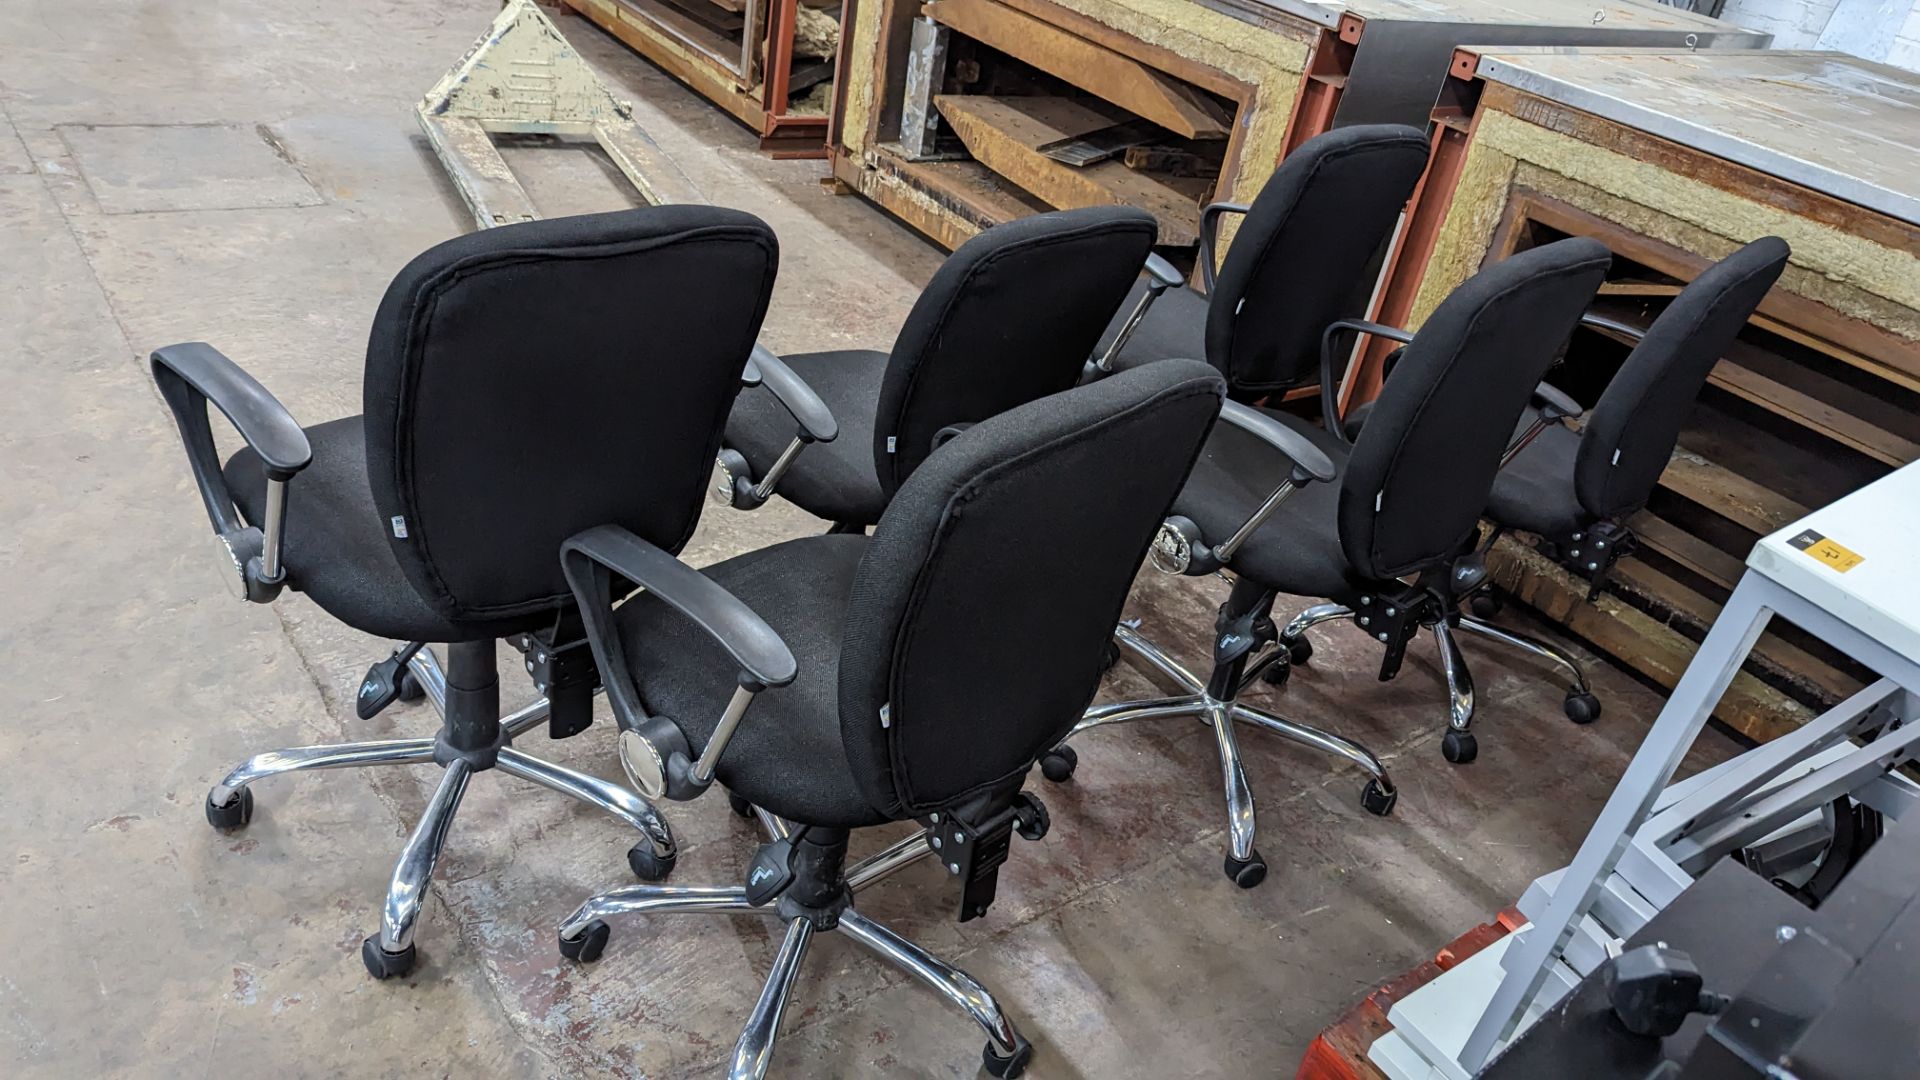 6 off matching chairs with arms - Image 5 of 6